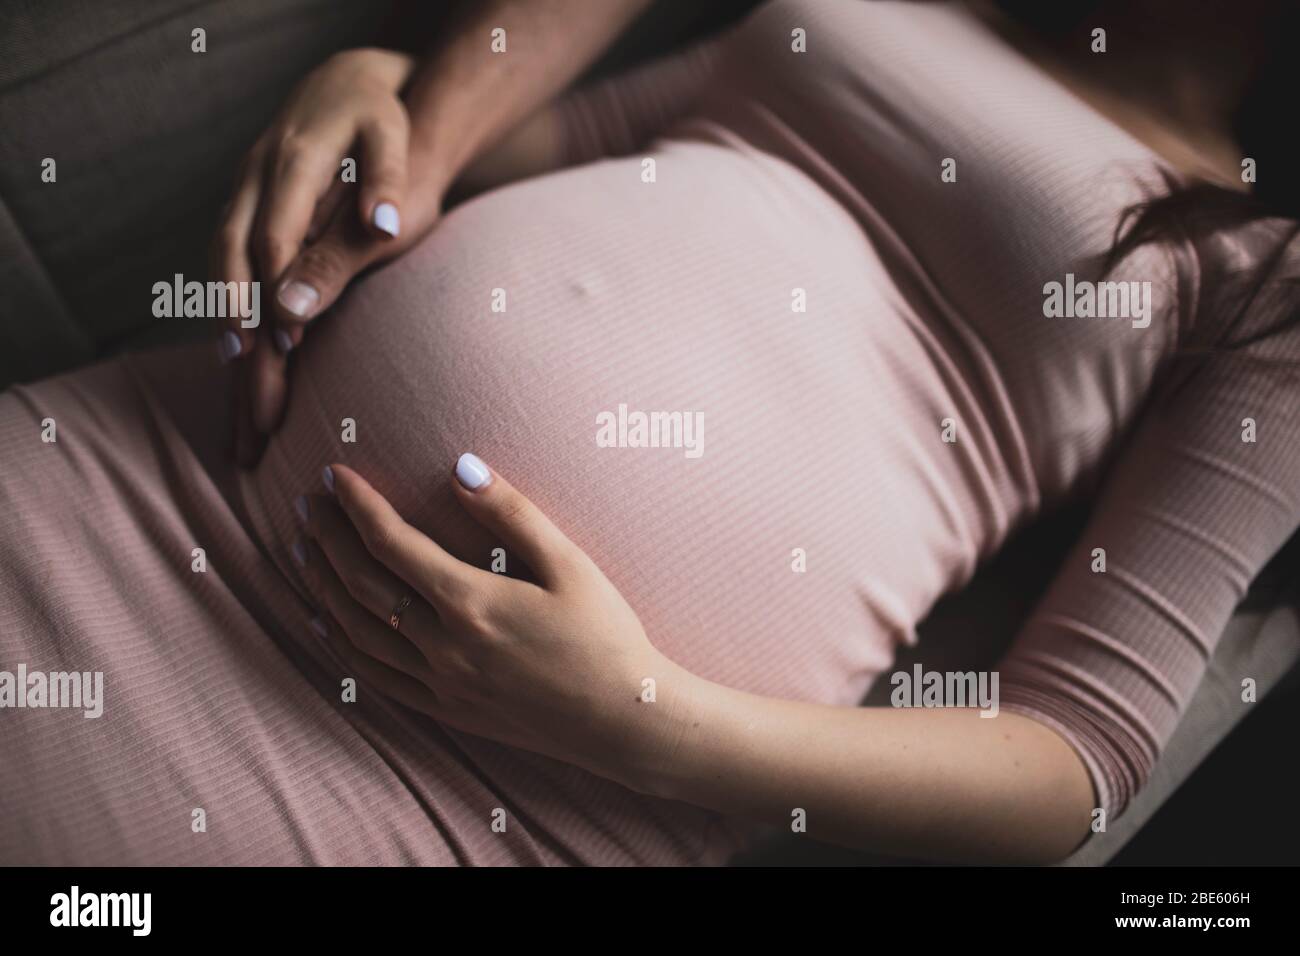 Male and female hands on a pregnant belly. The girl in the pink dress. Stock Photo